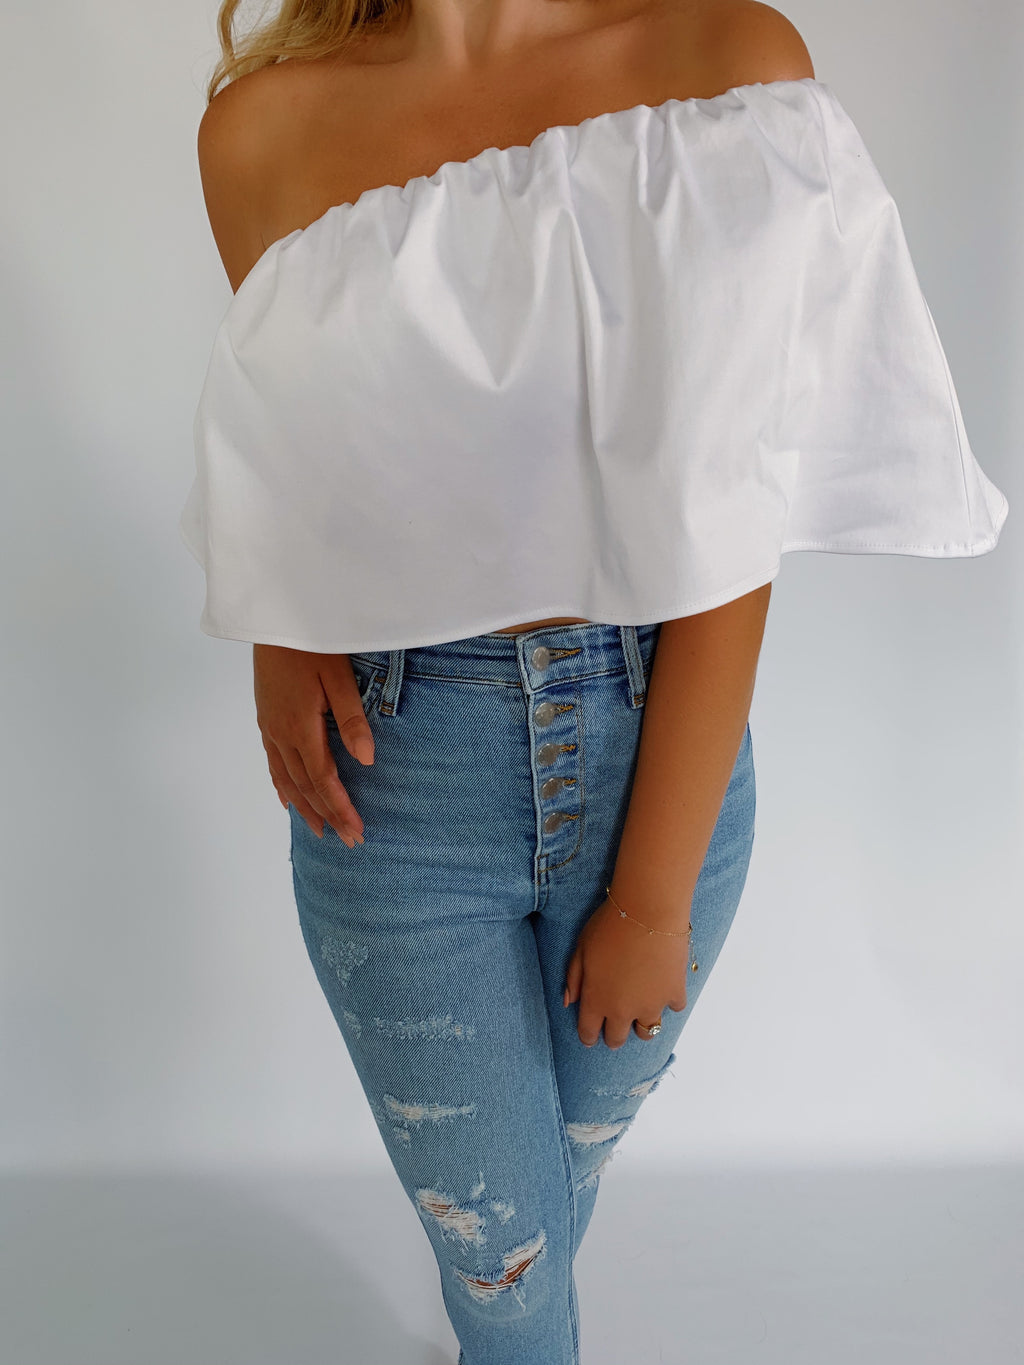 The Selina Top